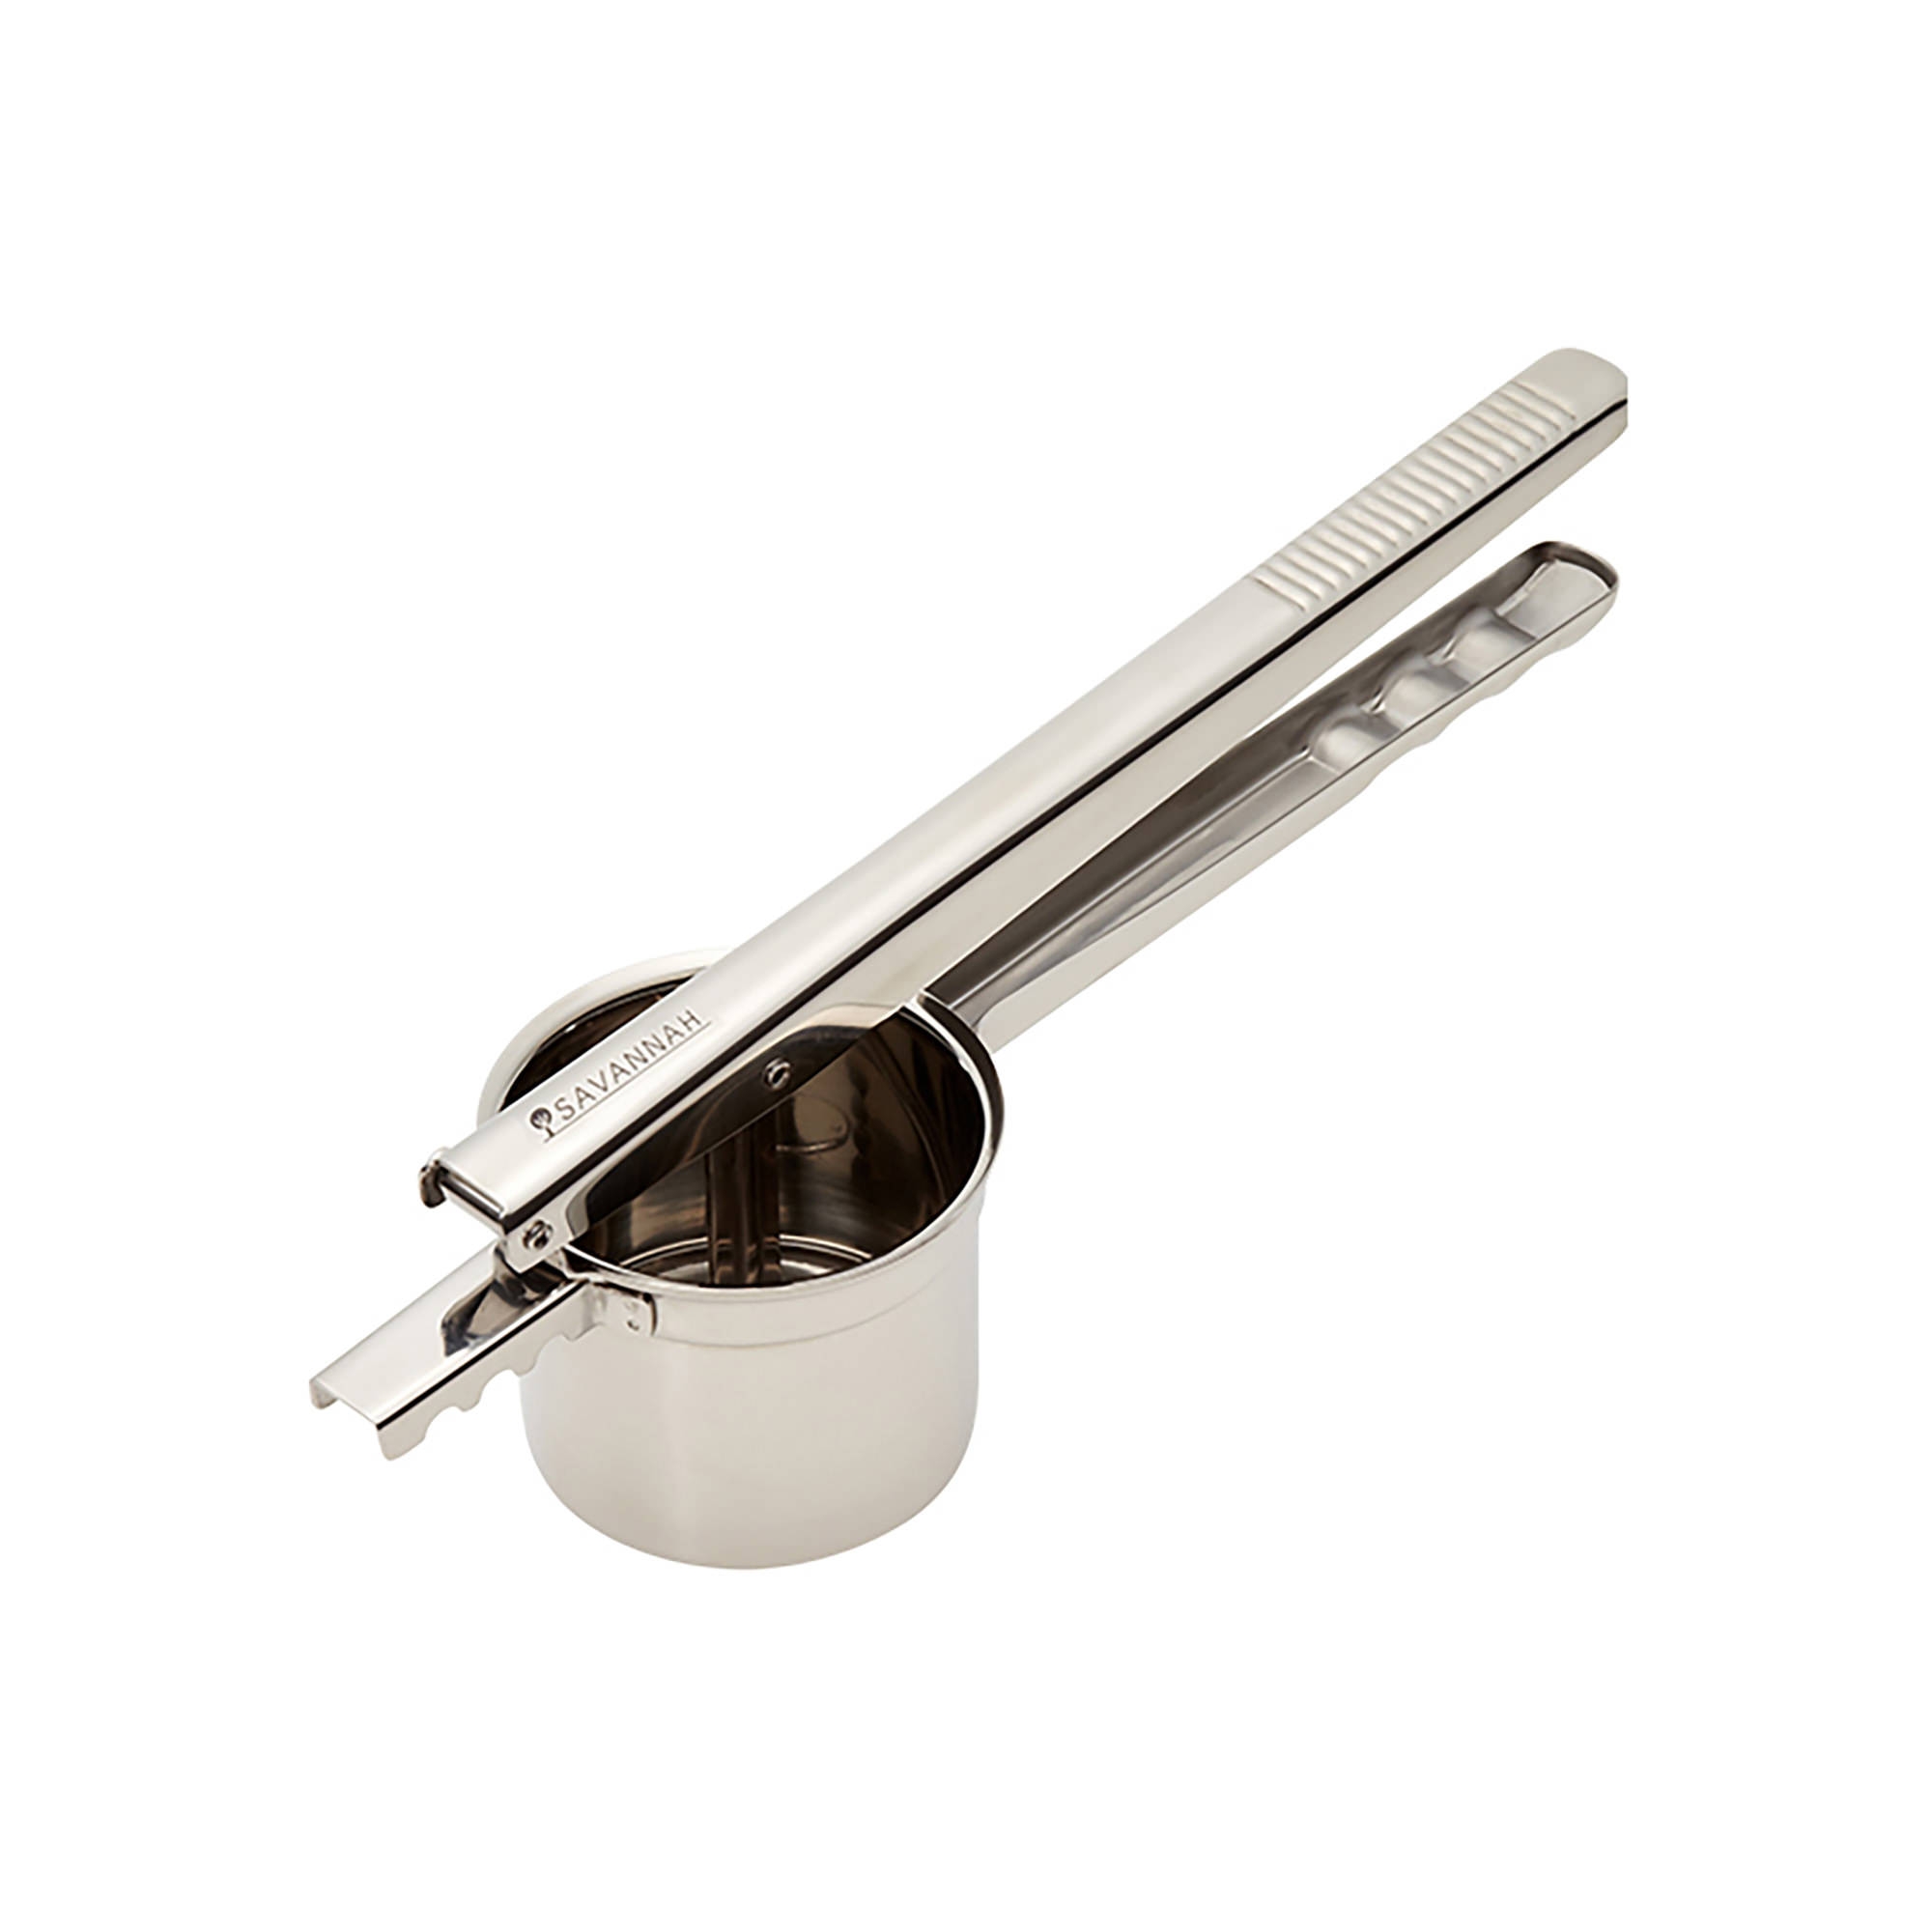 Savannah Stainless Steel Potato Ricer with 3 Discs Image 1